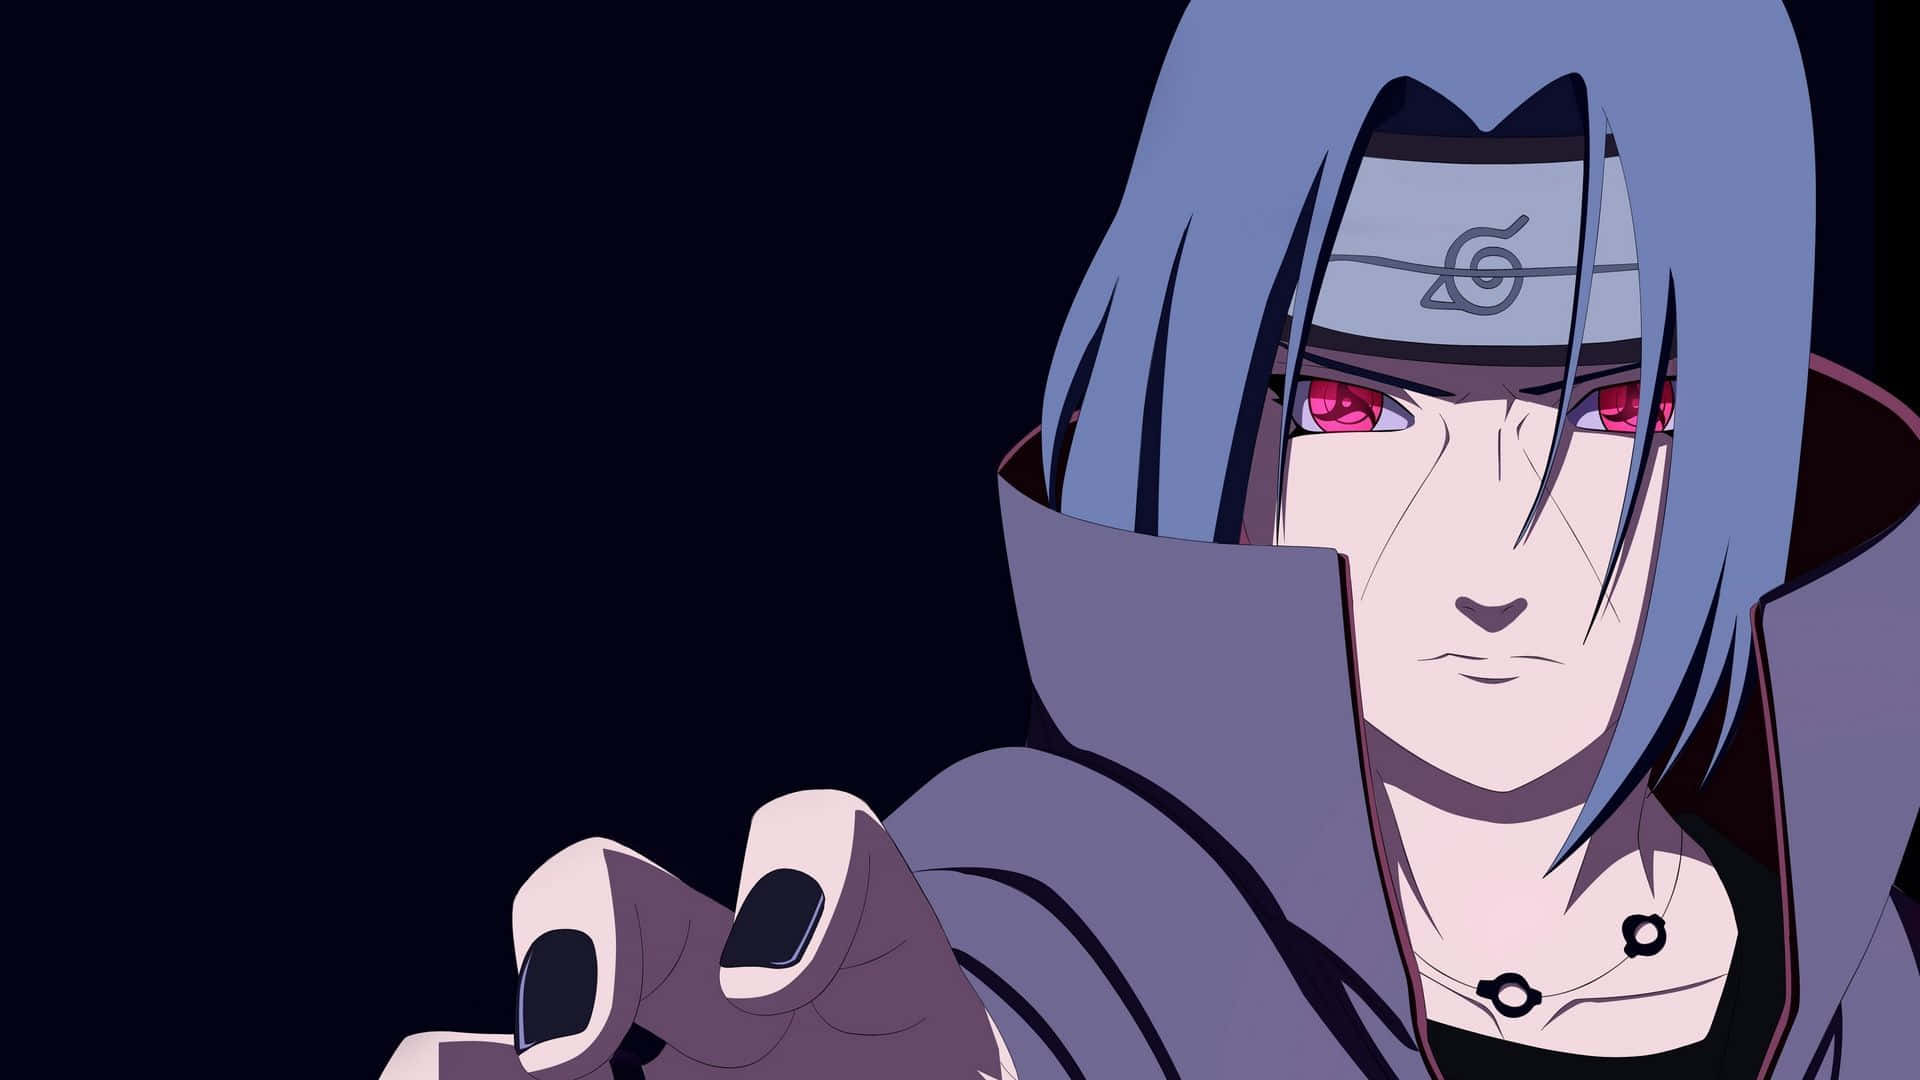 Itachi Aesthetic With Fierce Expression And Sharingan Eyes Wallpaper